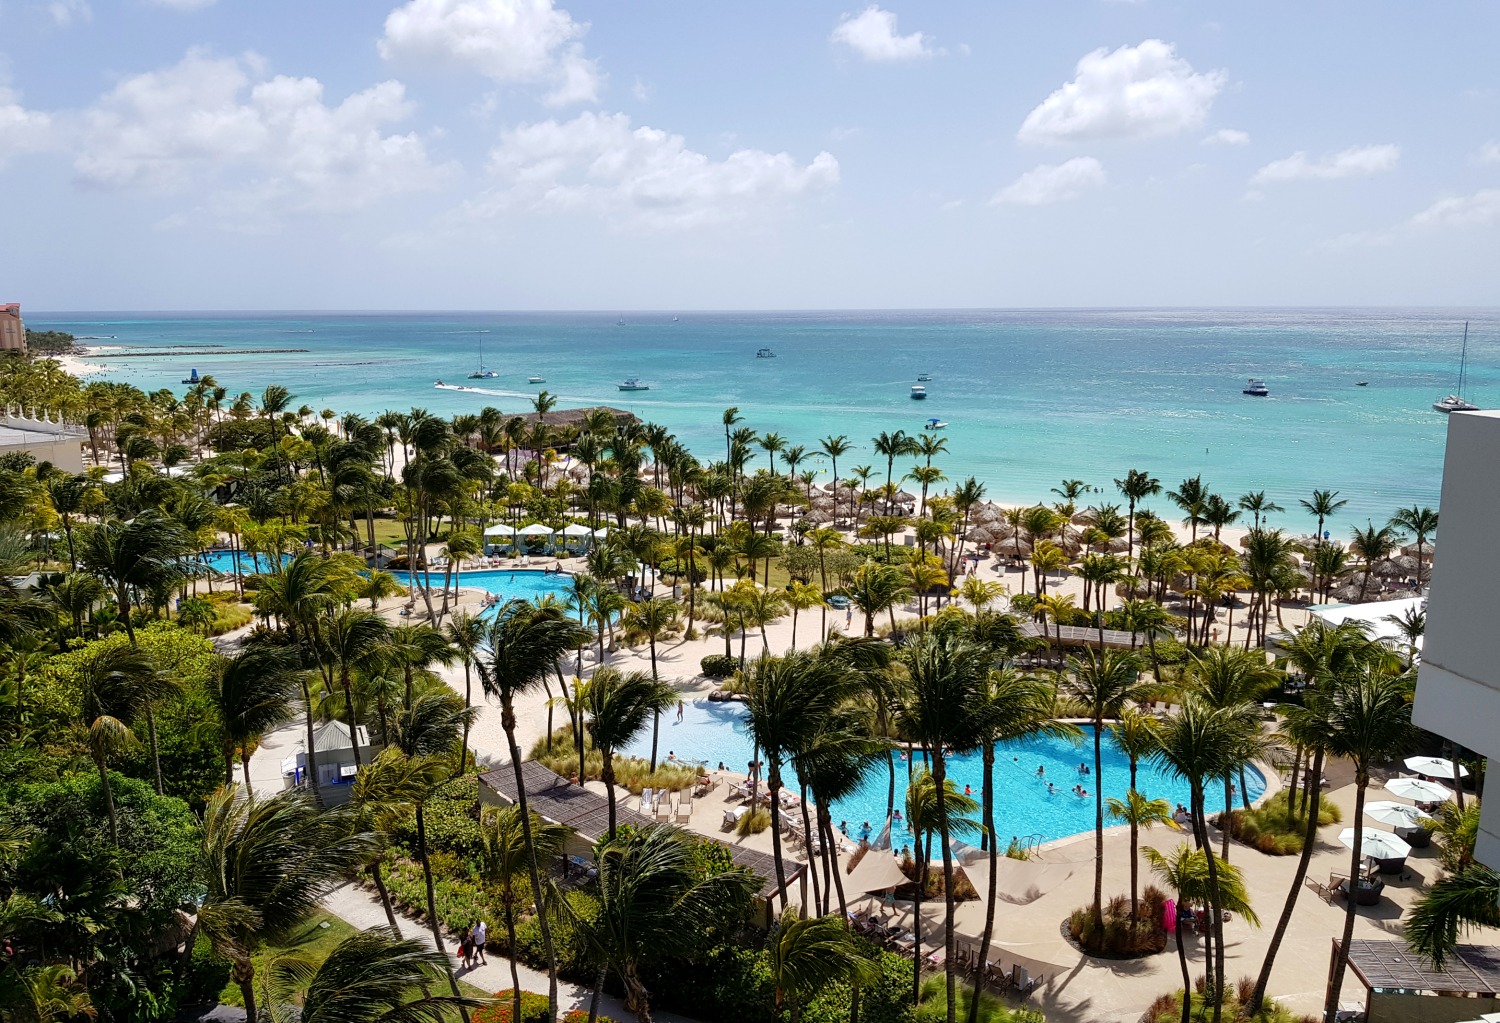 View from our balcony at the Hilton Aruba resort across to the pools and the sea - my Hilton Aruba review. Is this the best hotel in Aruba with kids?